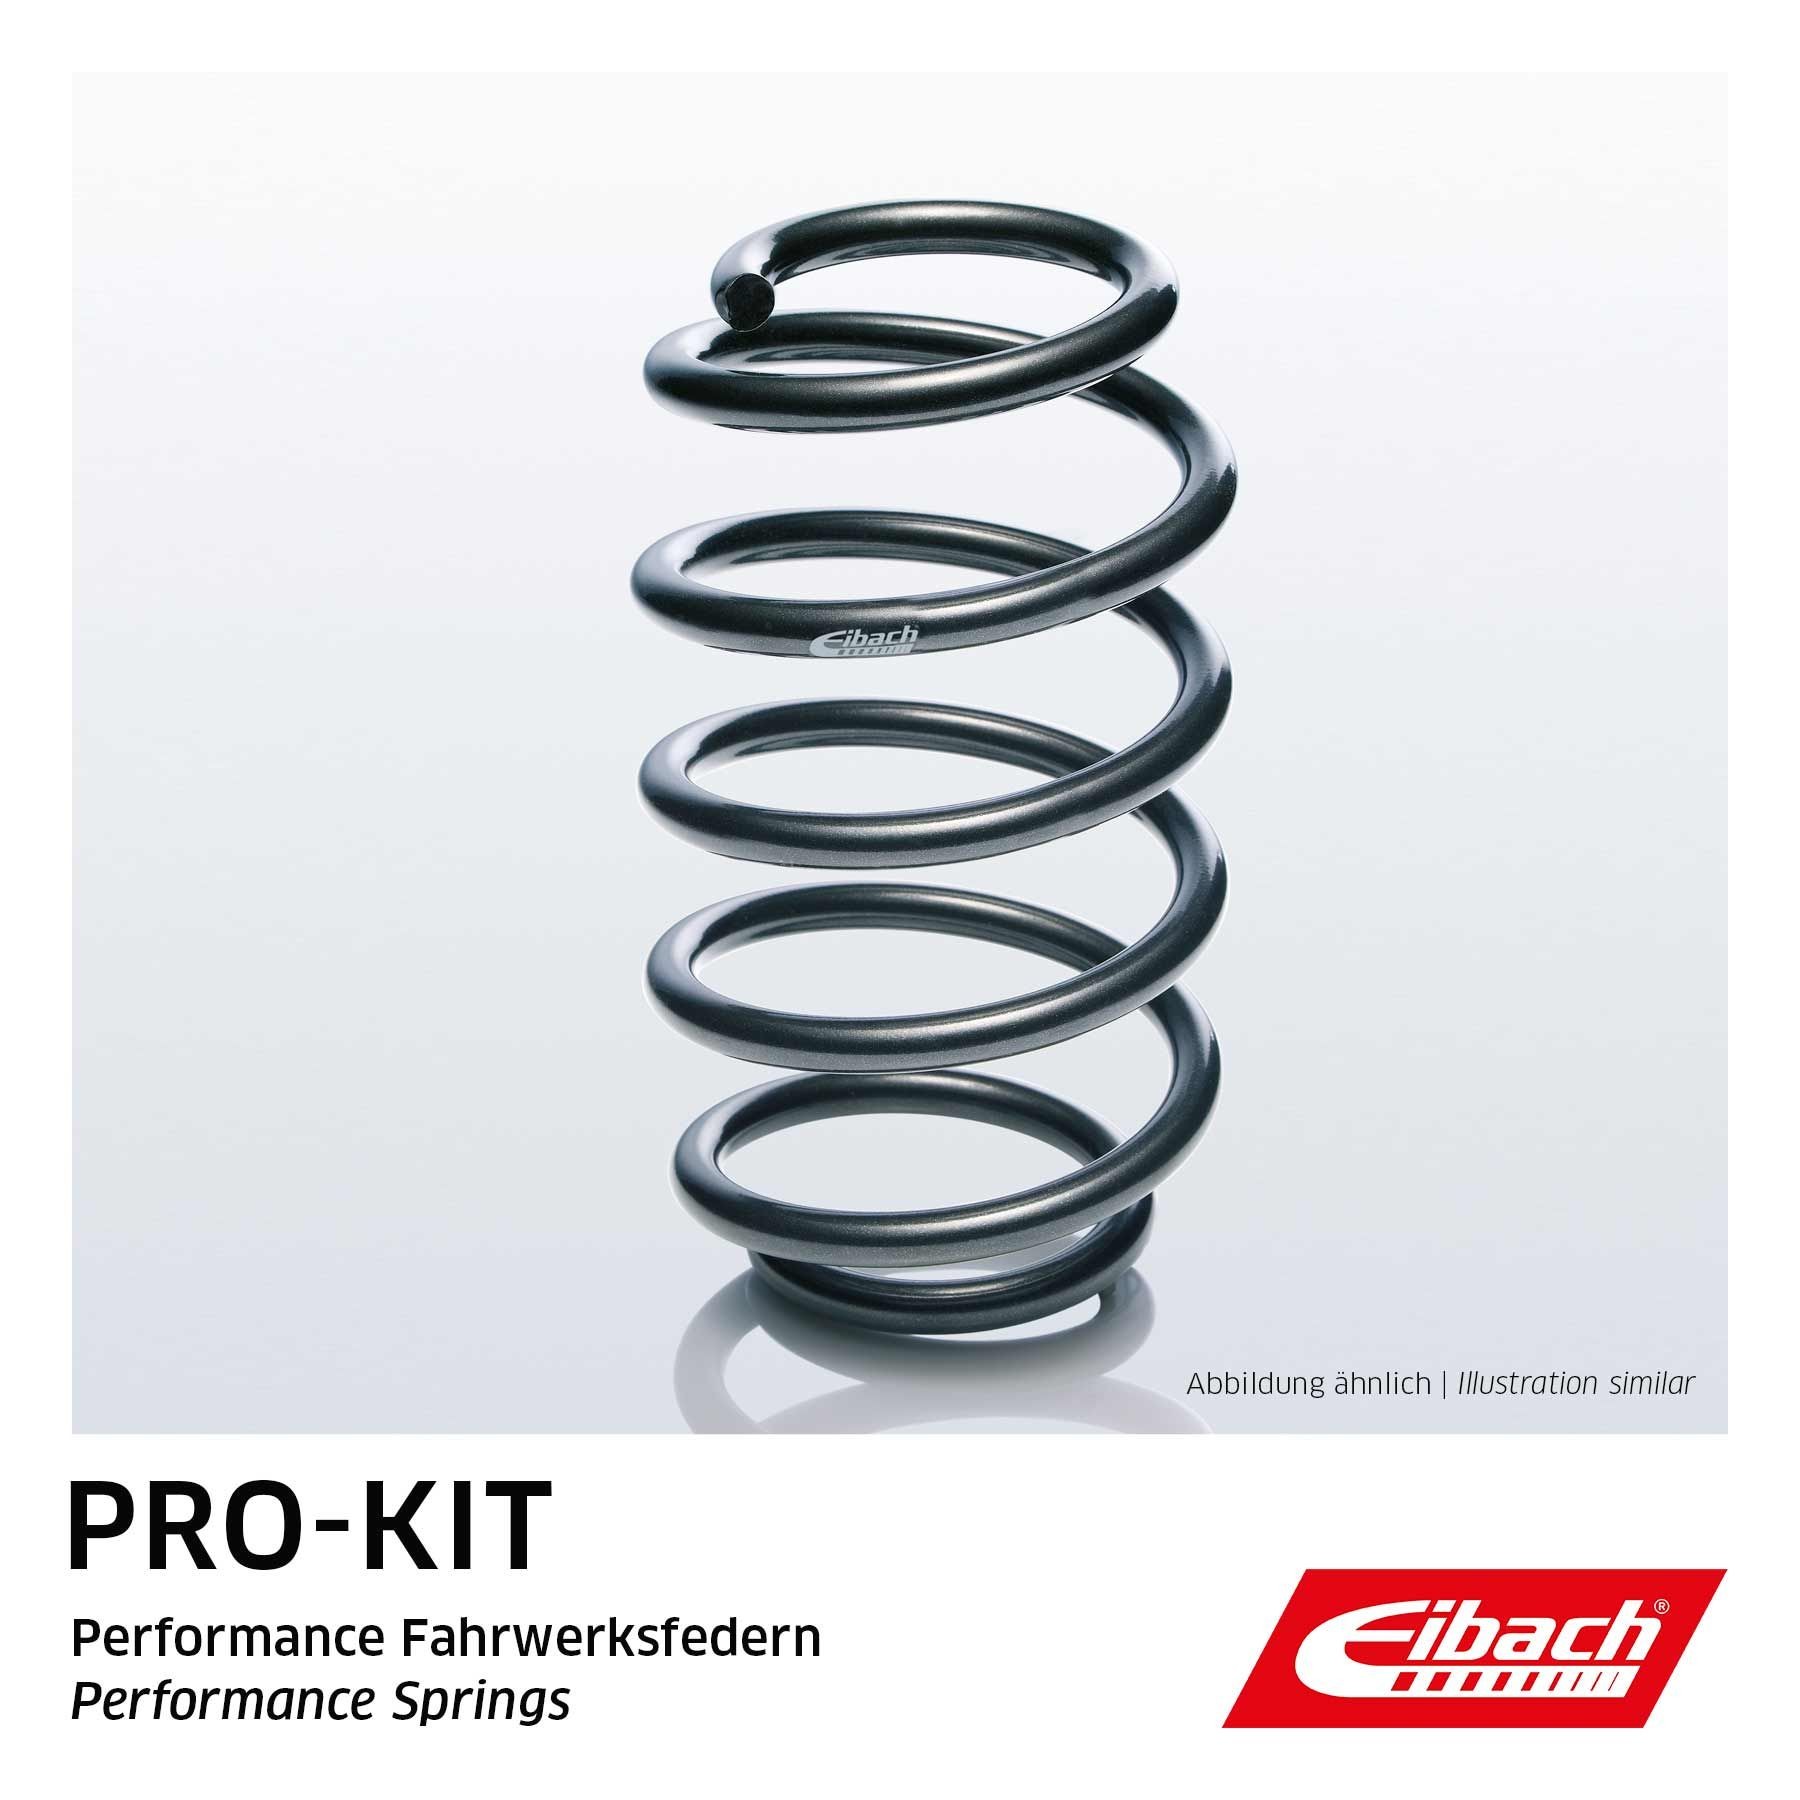 EIBACH Springs rear and front PEUGEOT 508 I (8D_) Saloon new F11-70-016-02-VA